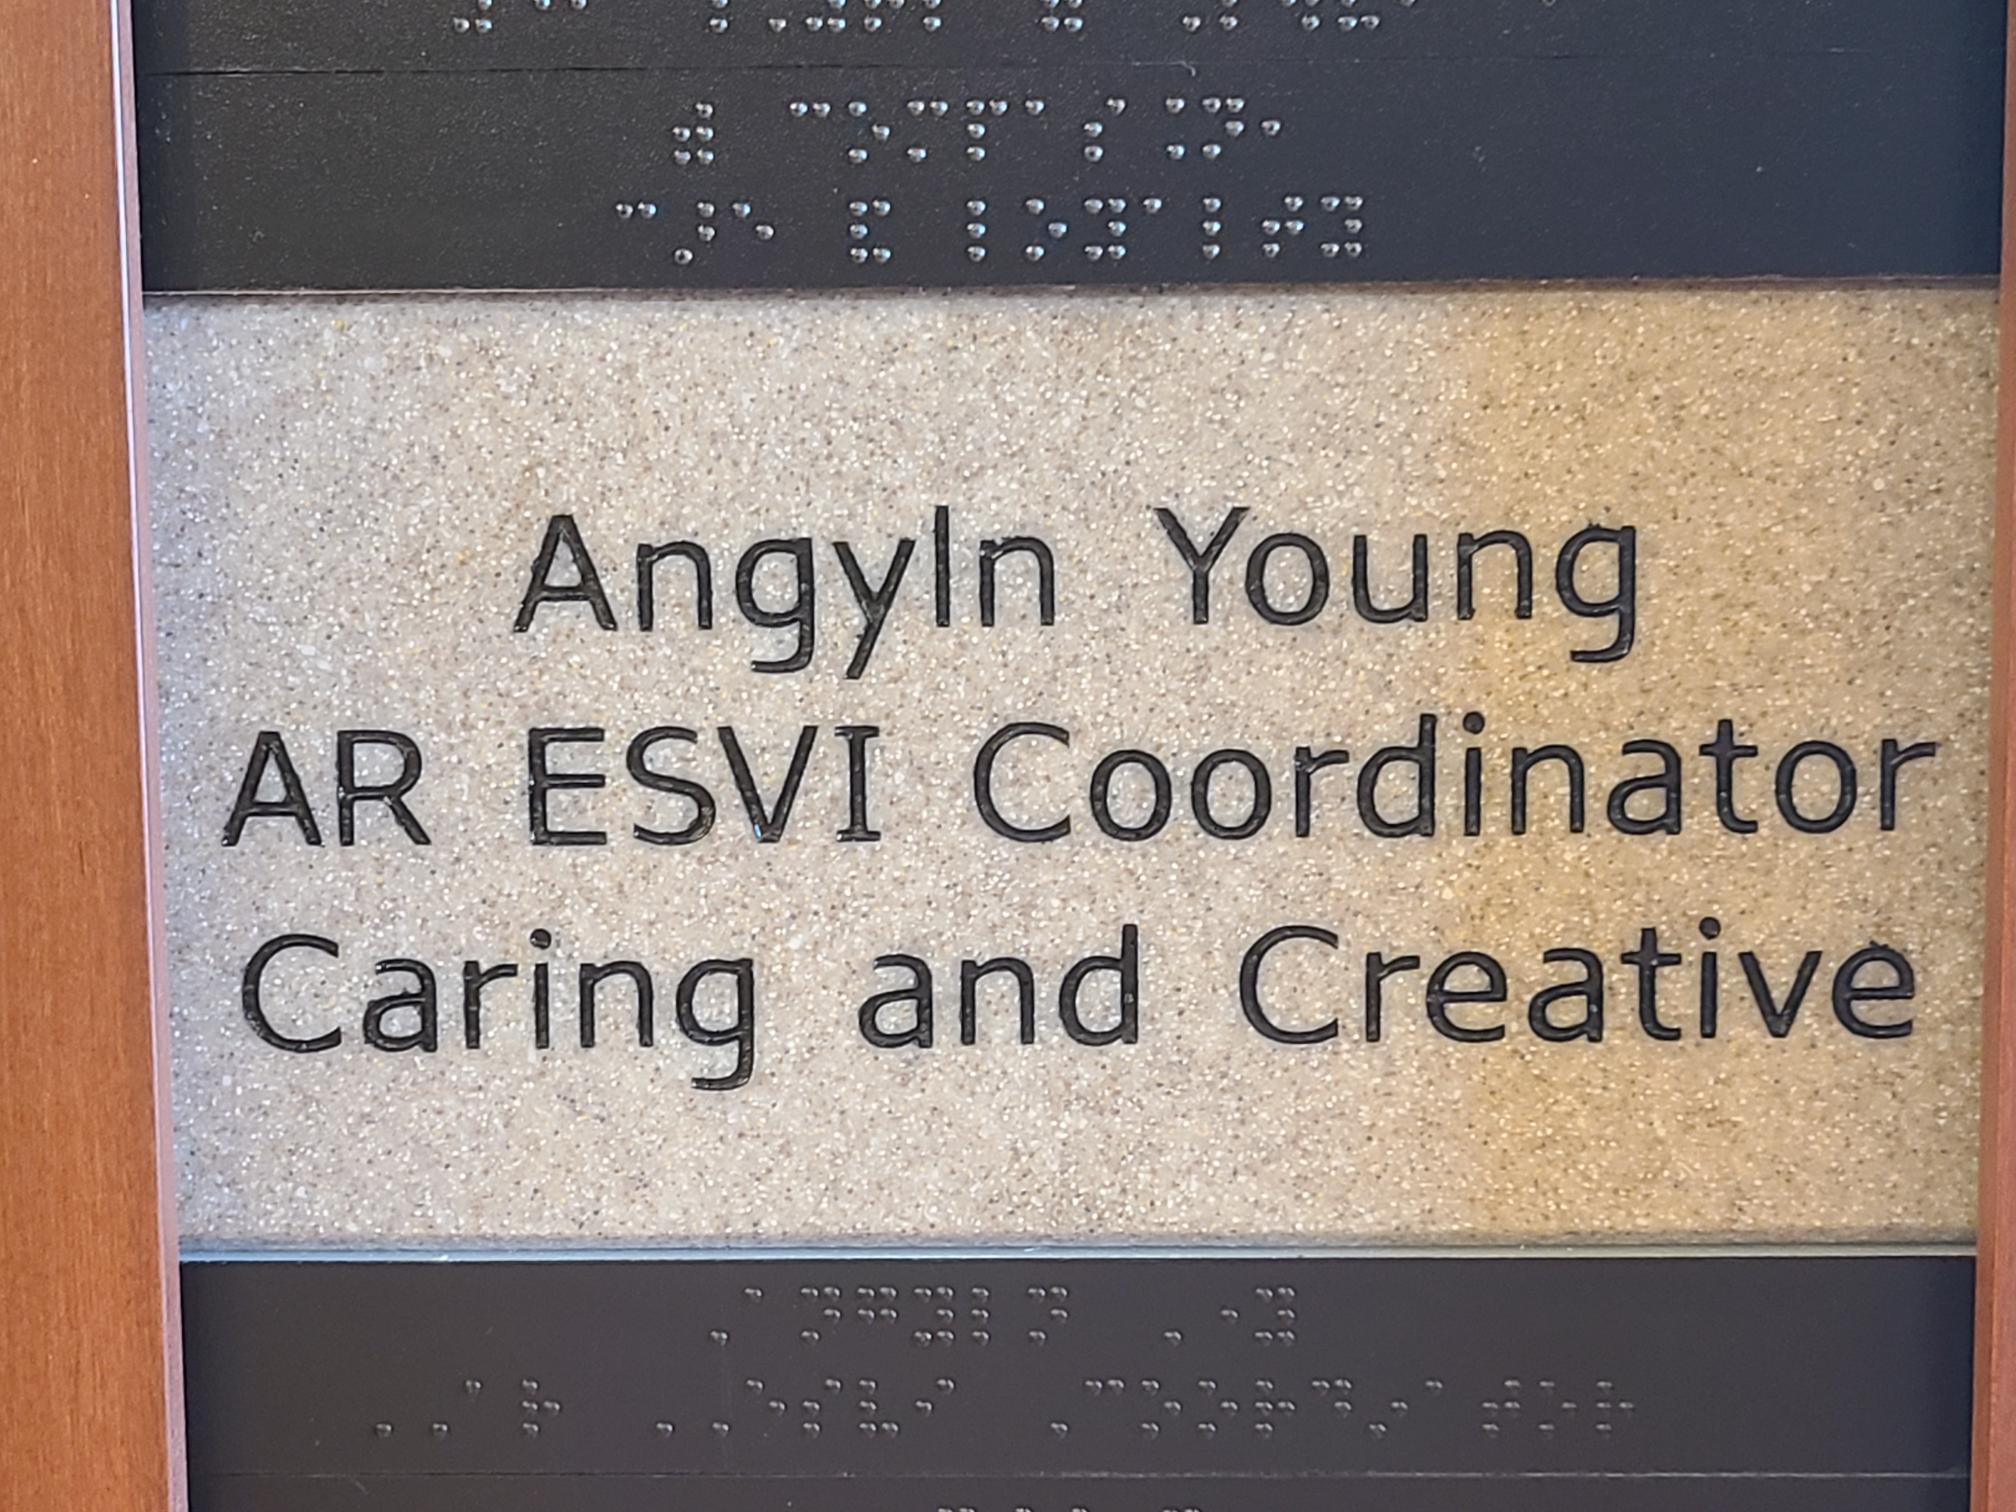 Angyln Young, AR ESVI Coordinator, Caring and Creative